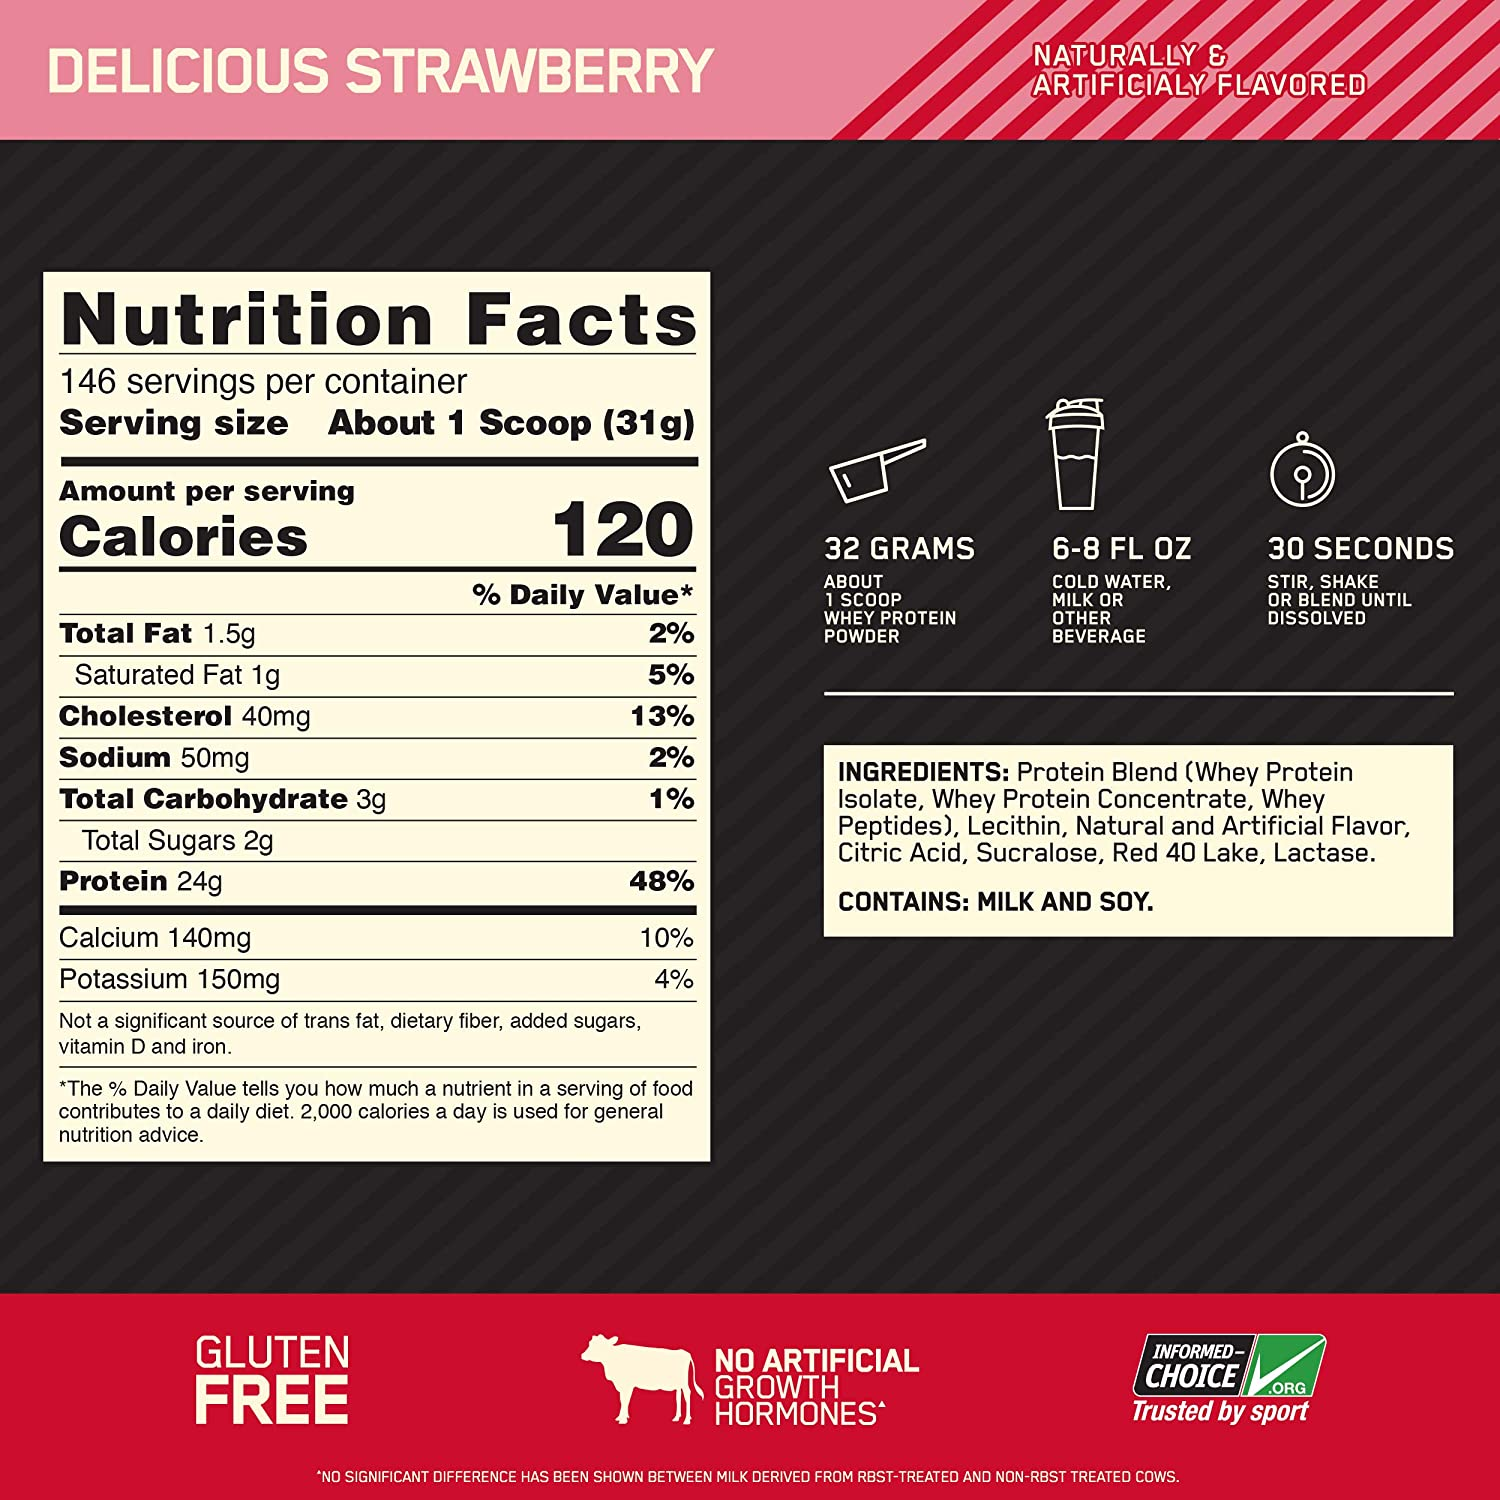 Nutritional facts for Delicious Strawberry Whey Protein Powder. Serving size is 1 scoop. Contains 24g protein, 3g carbs, 1.5g fat per serving. Gluten-free.